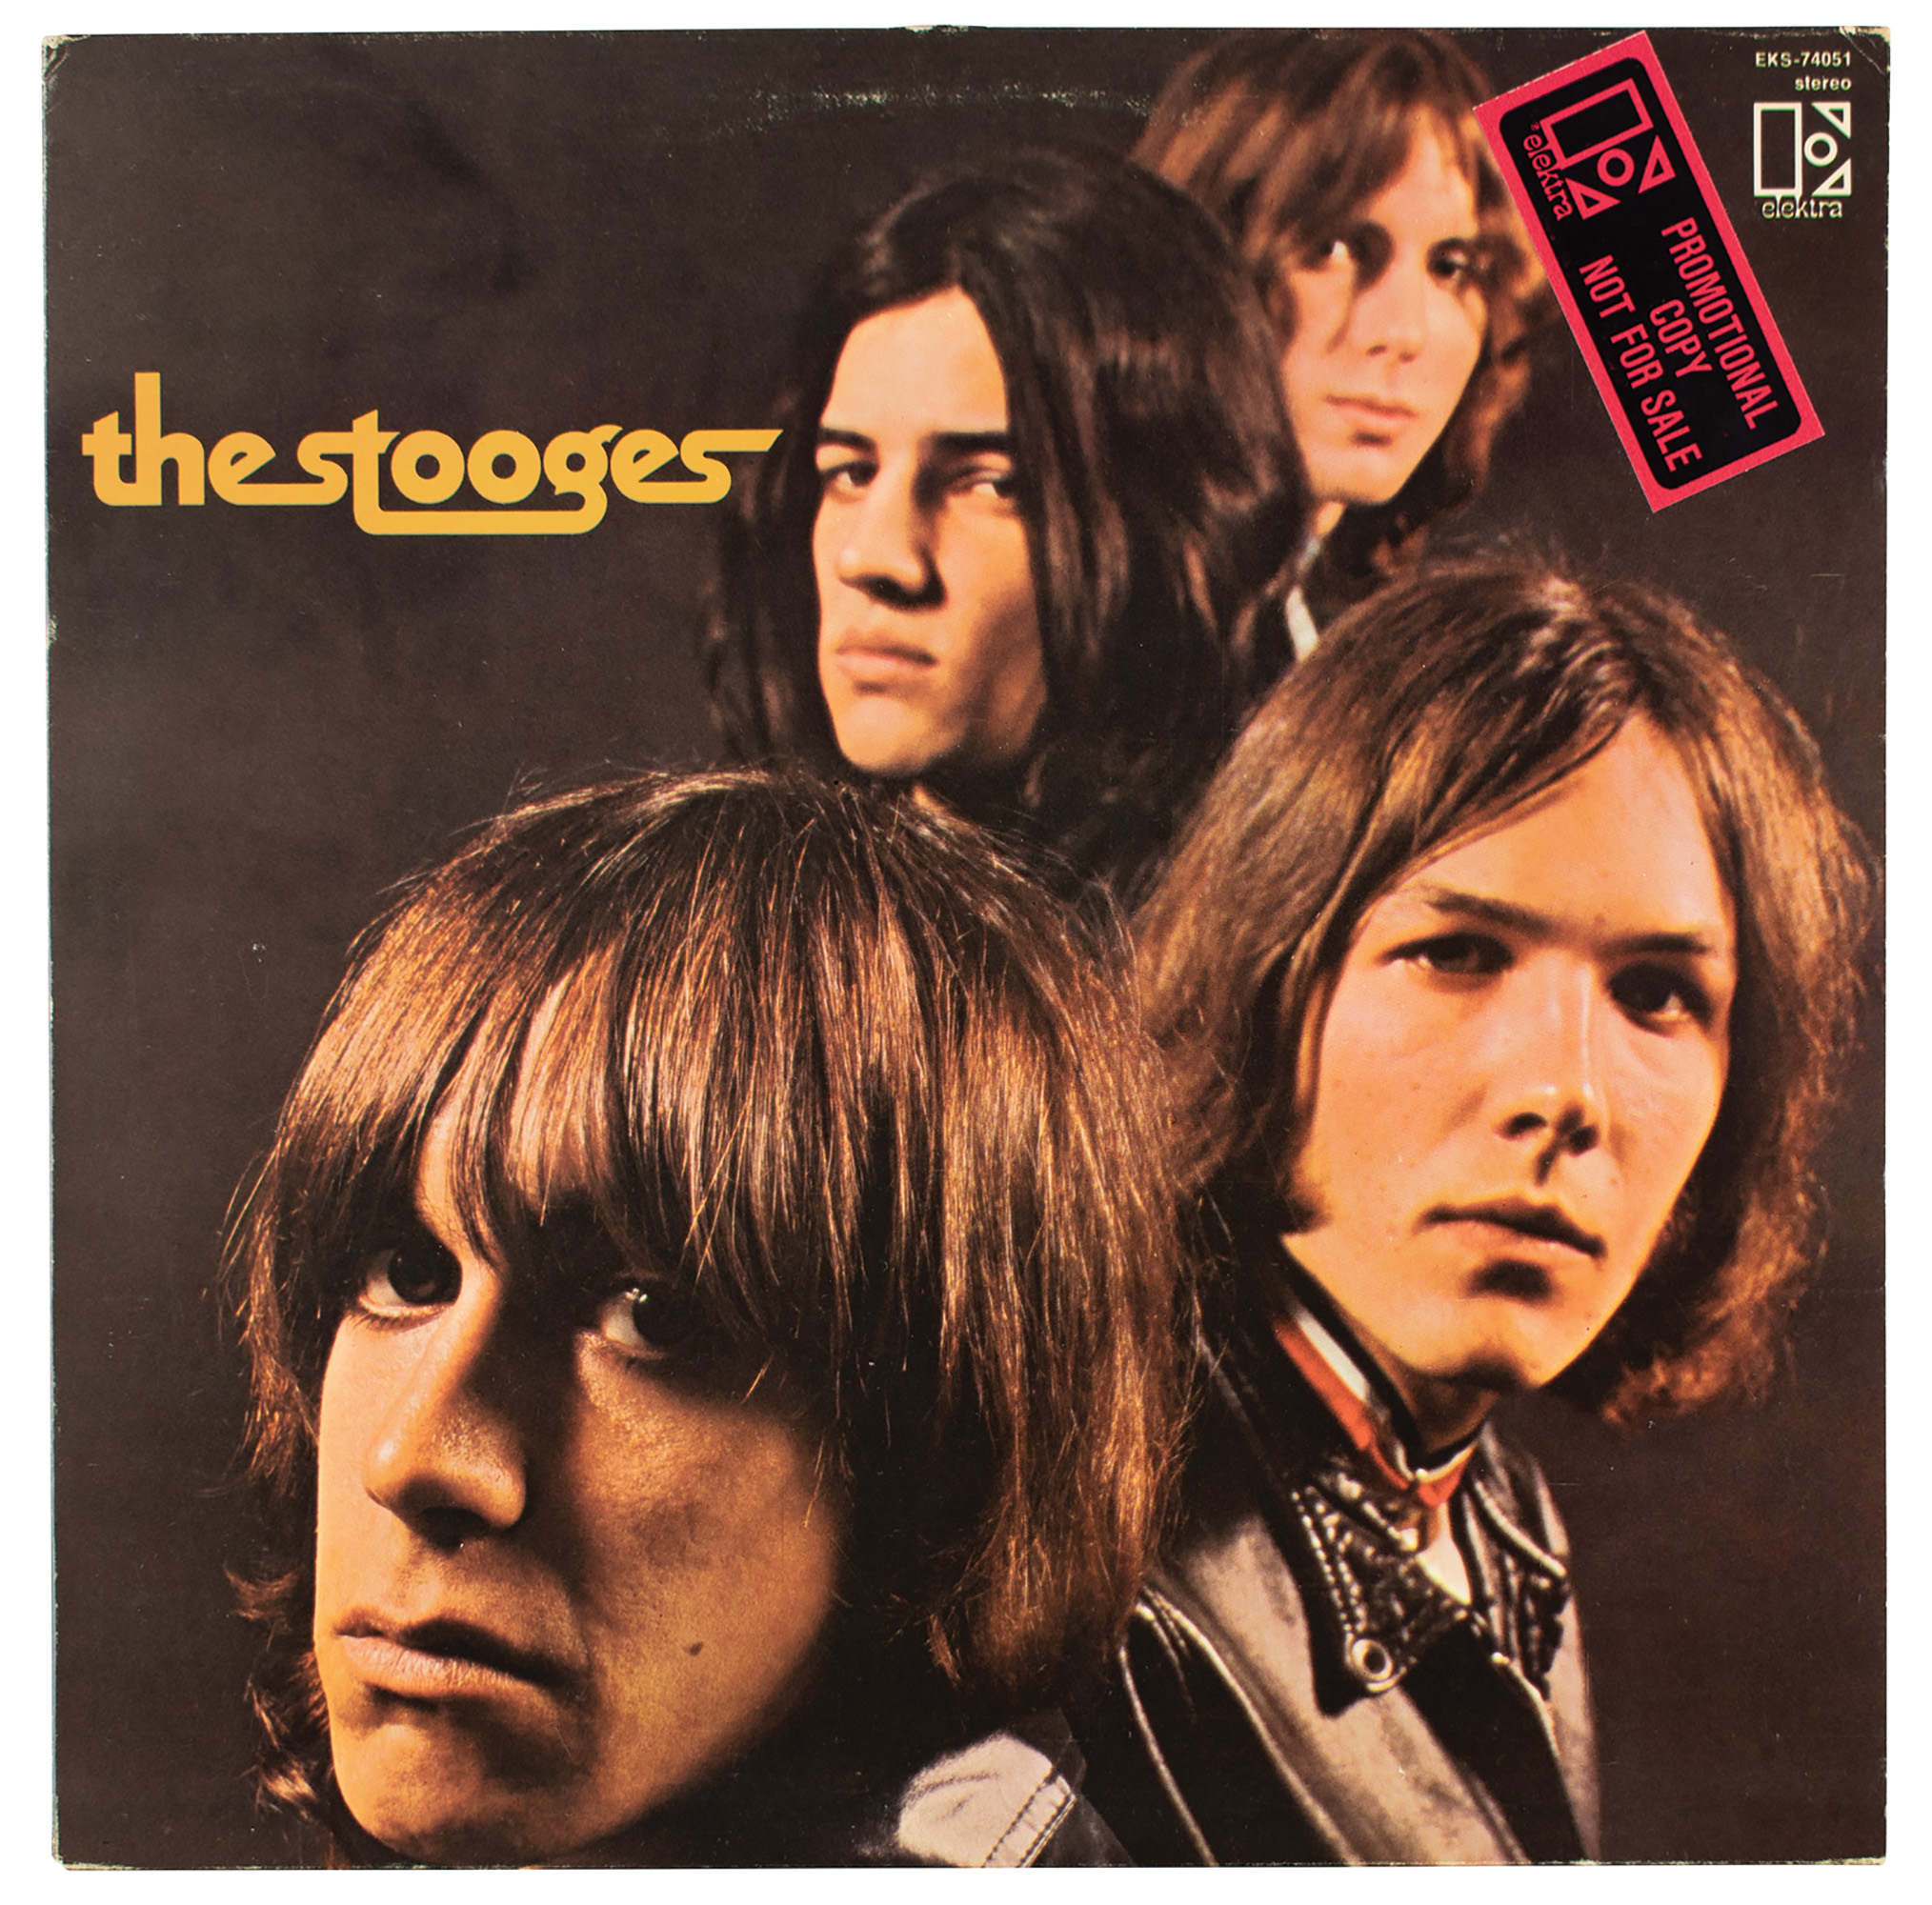 Lot #4551 The Stooges Promotional Album Package - Image 5